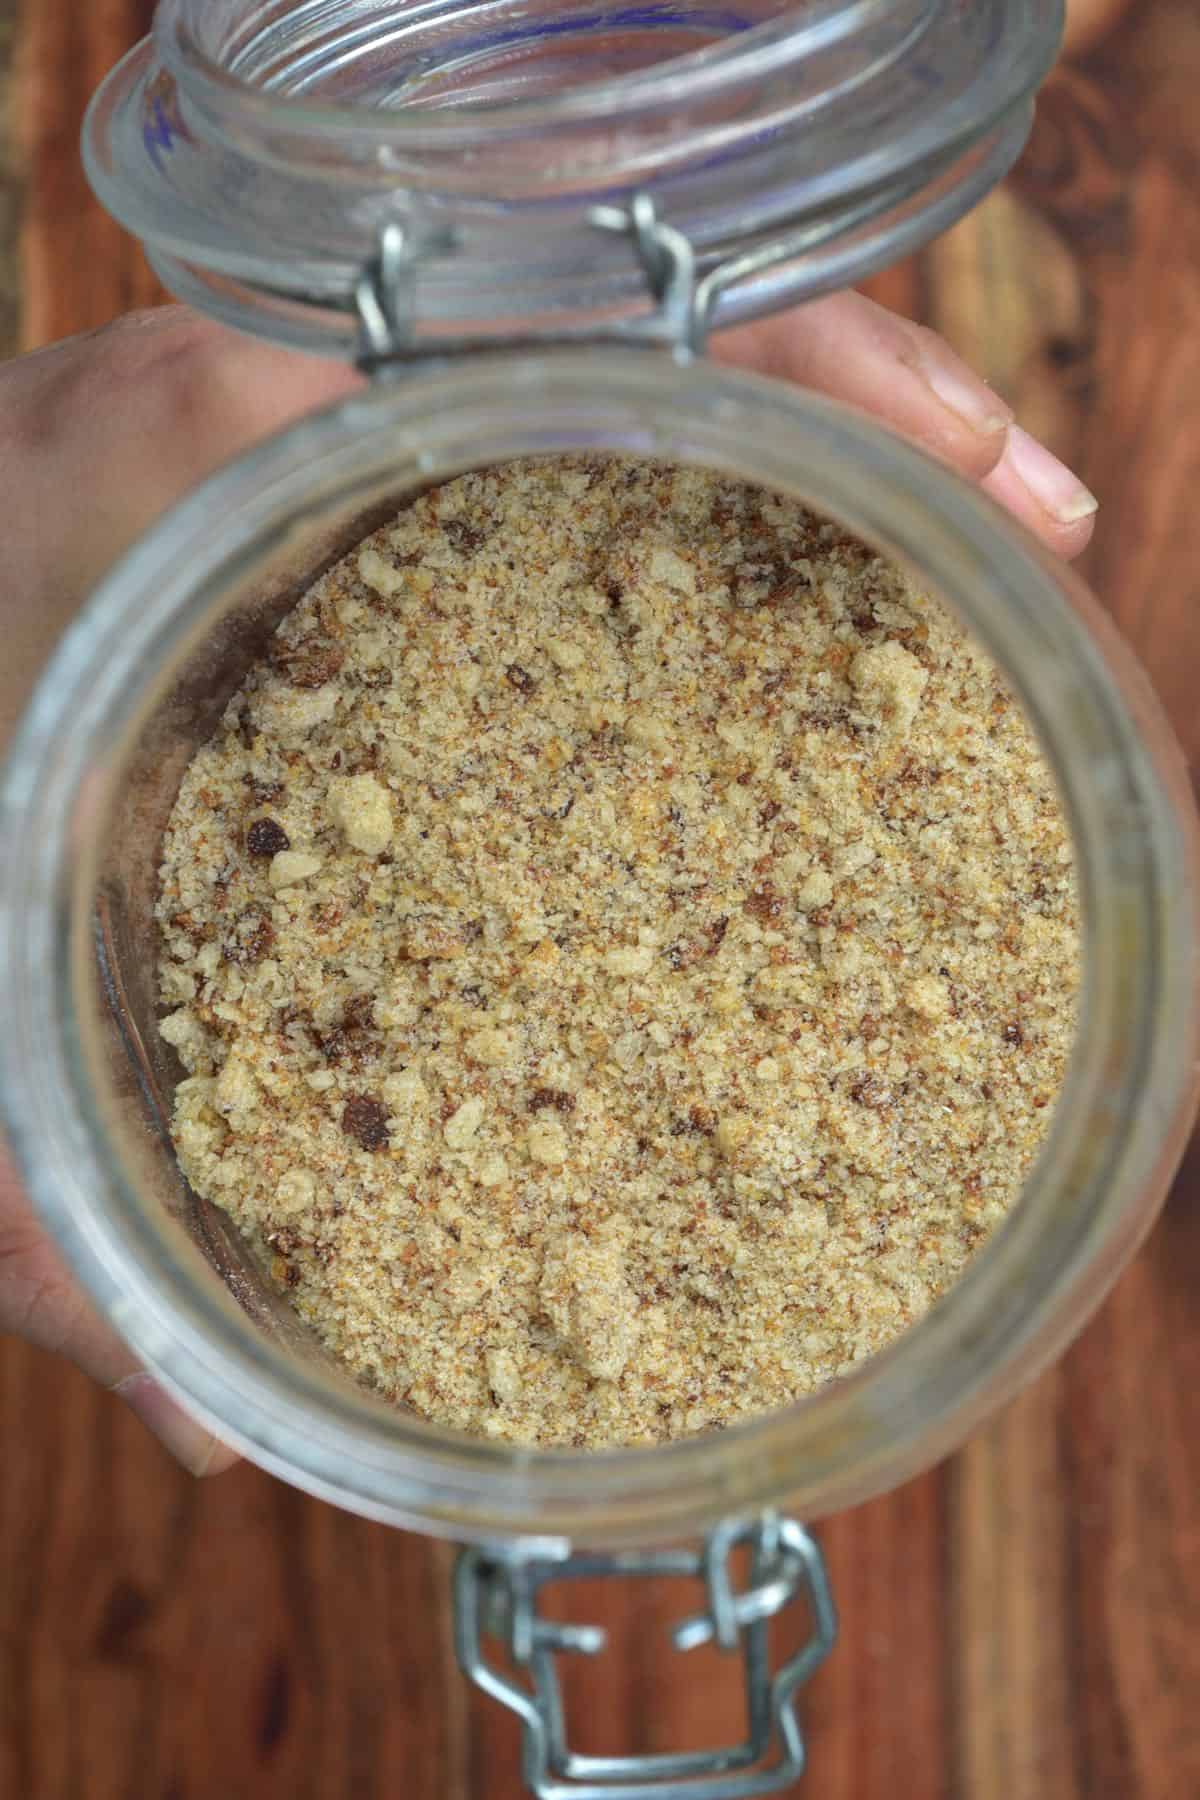 Top view of an open jar filled with breadcrumbs